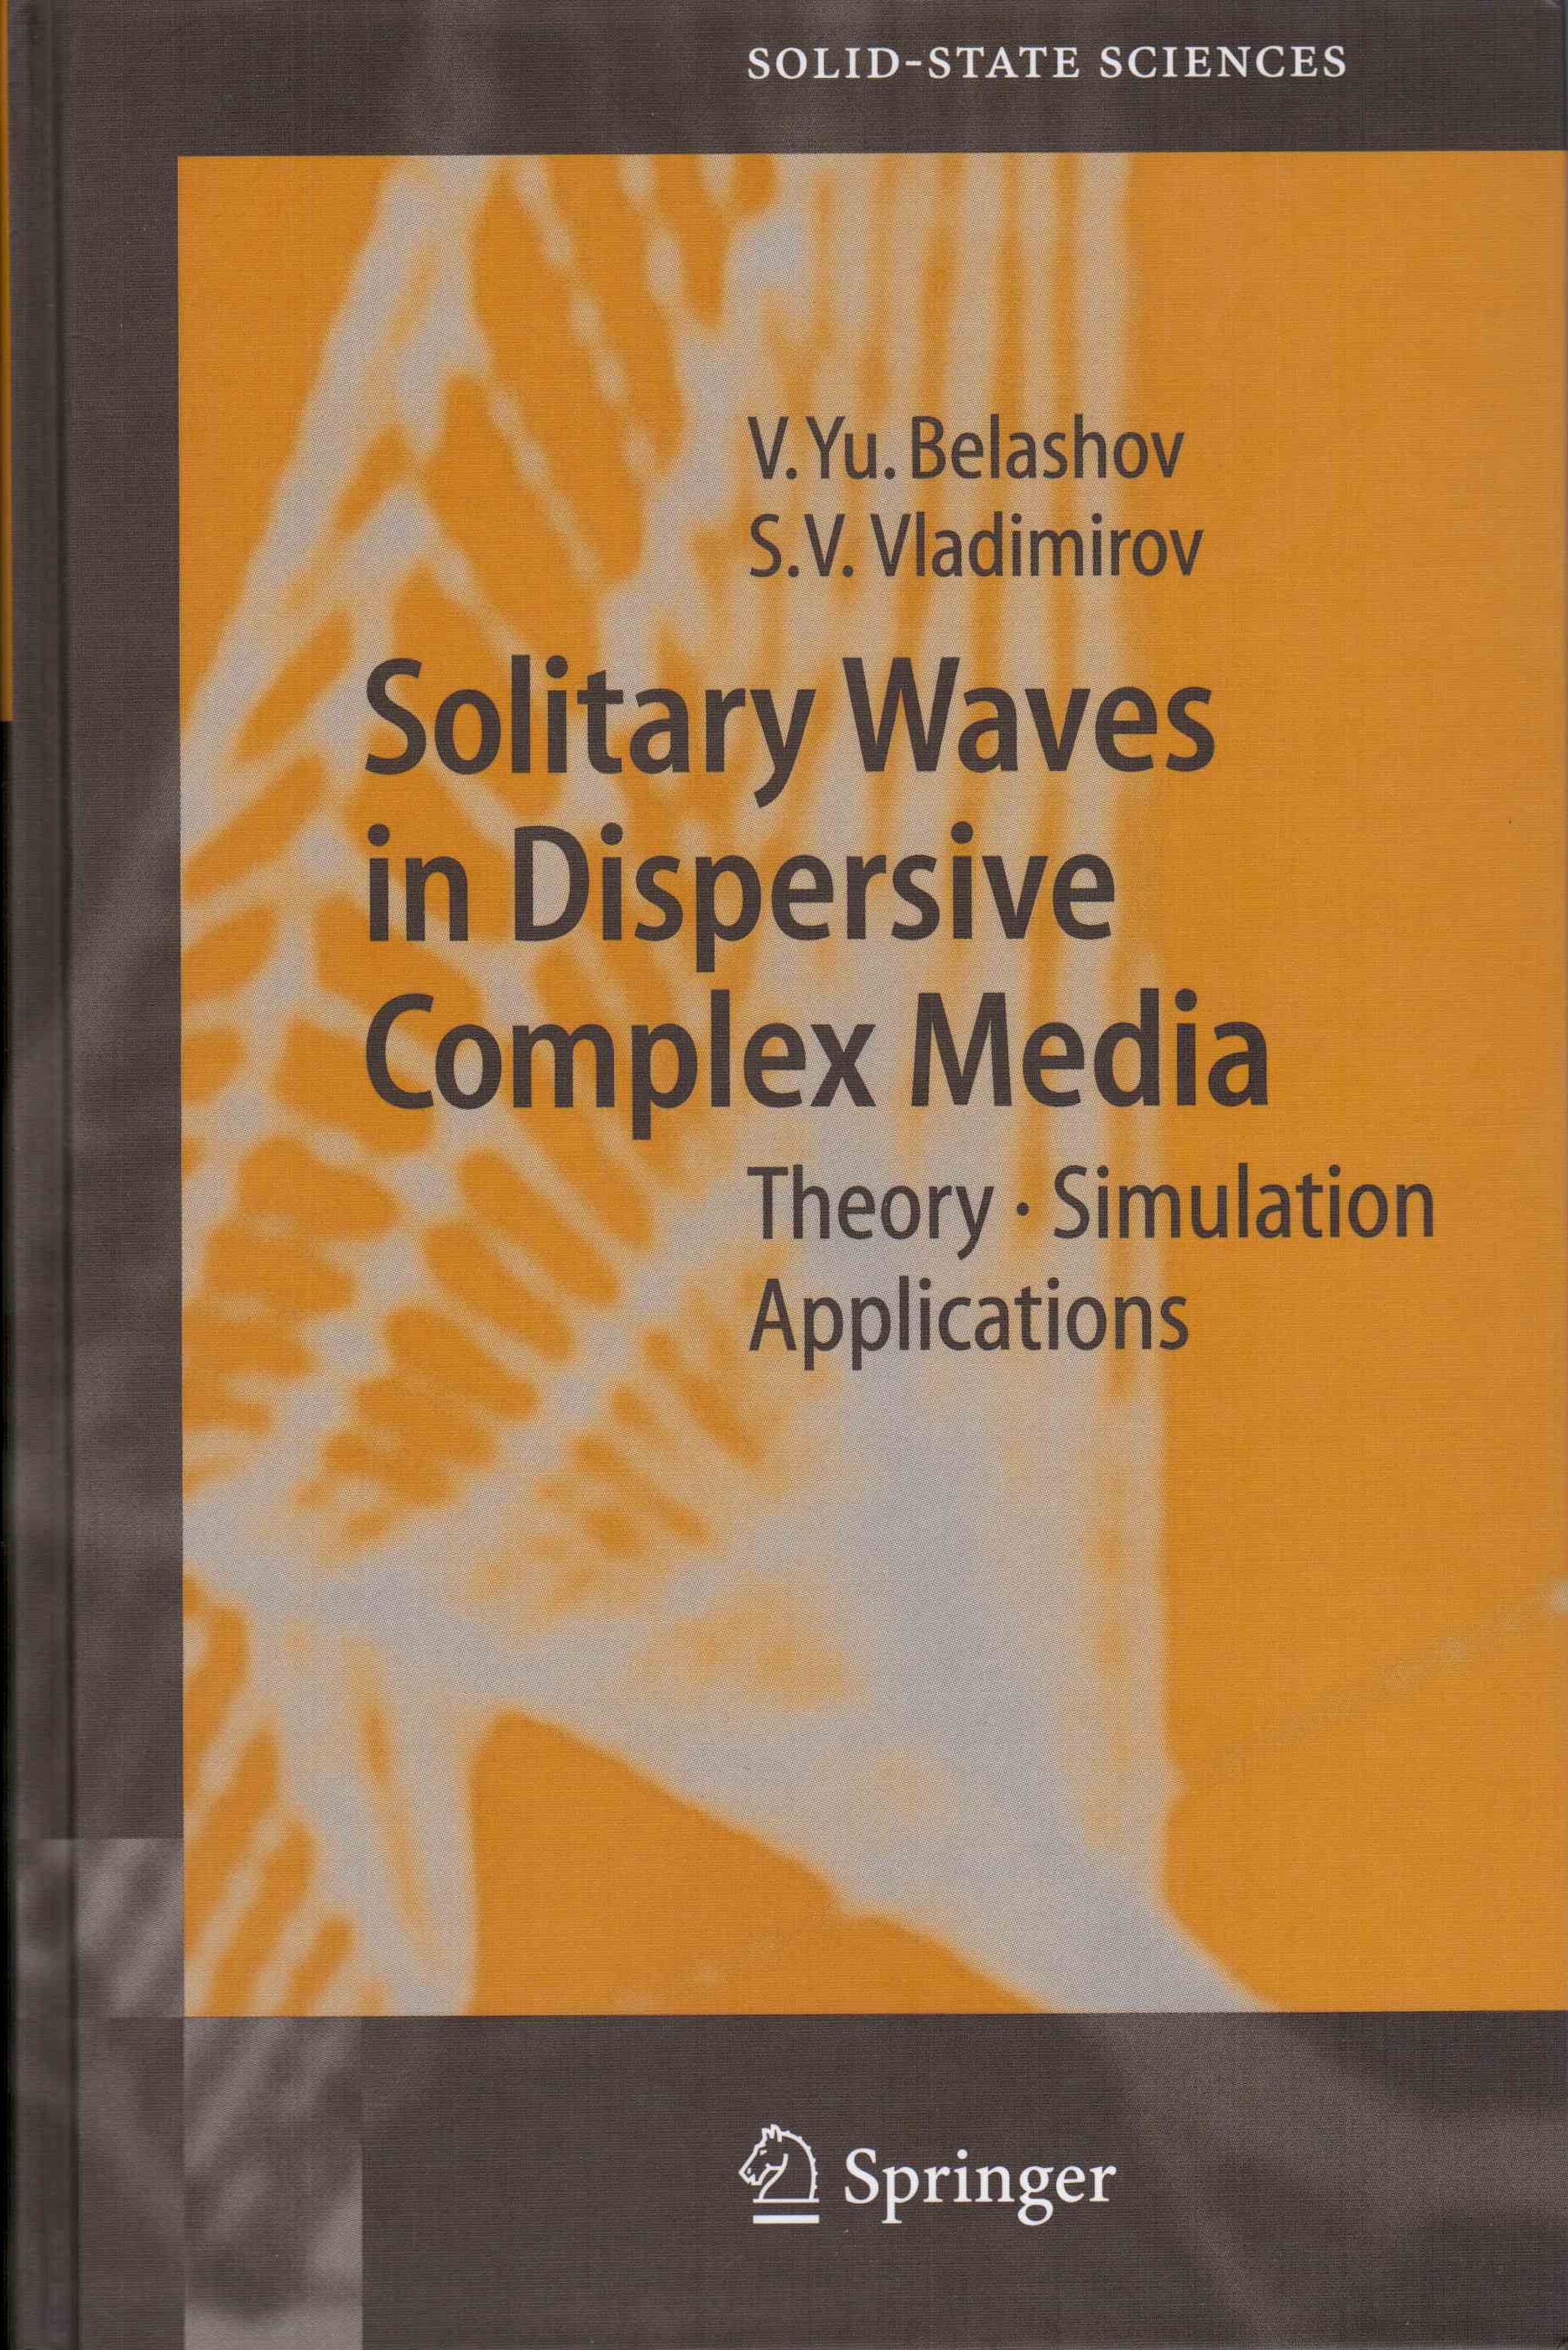 Solitary Waves in Dispersive Complex Media. Theory, Simulation, Applications